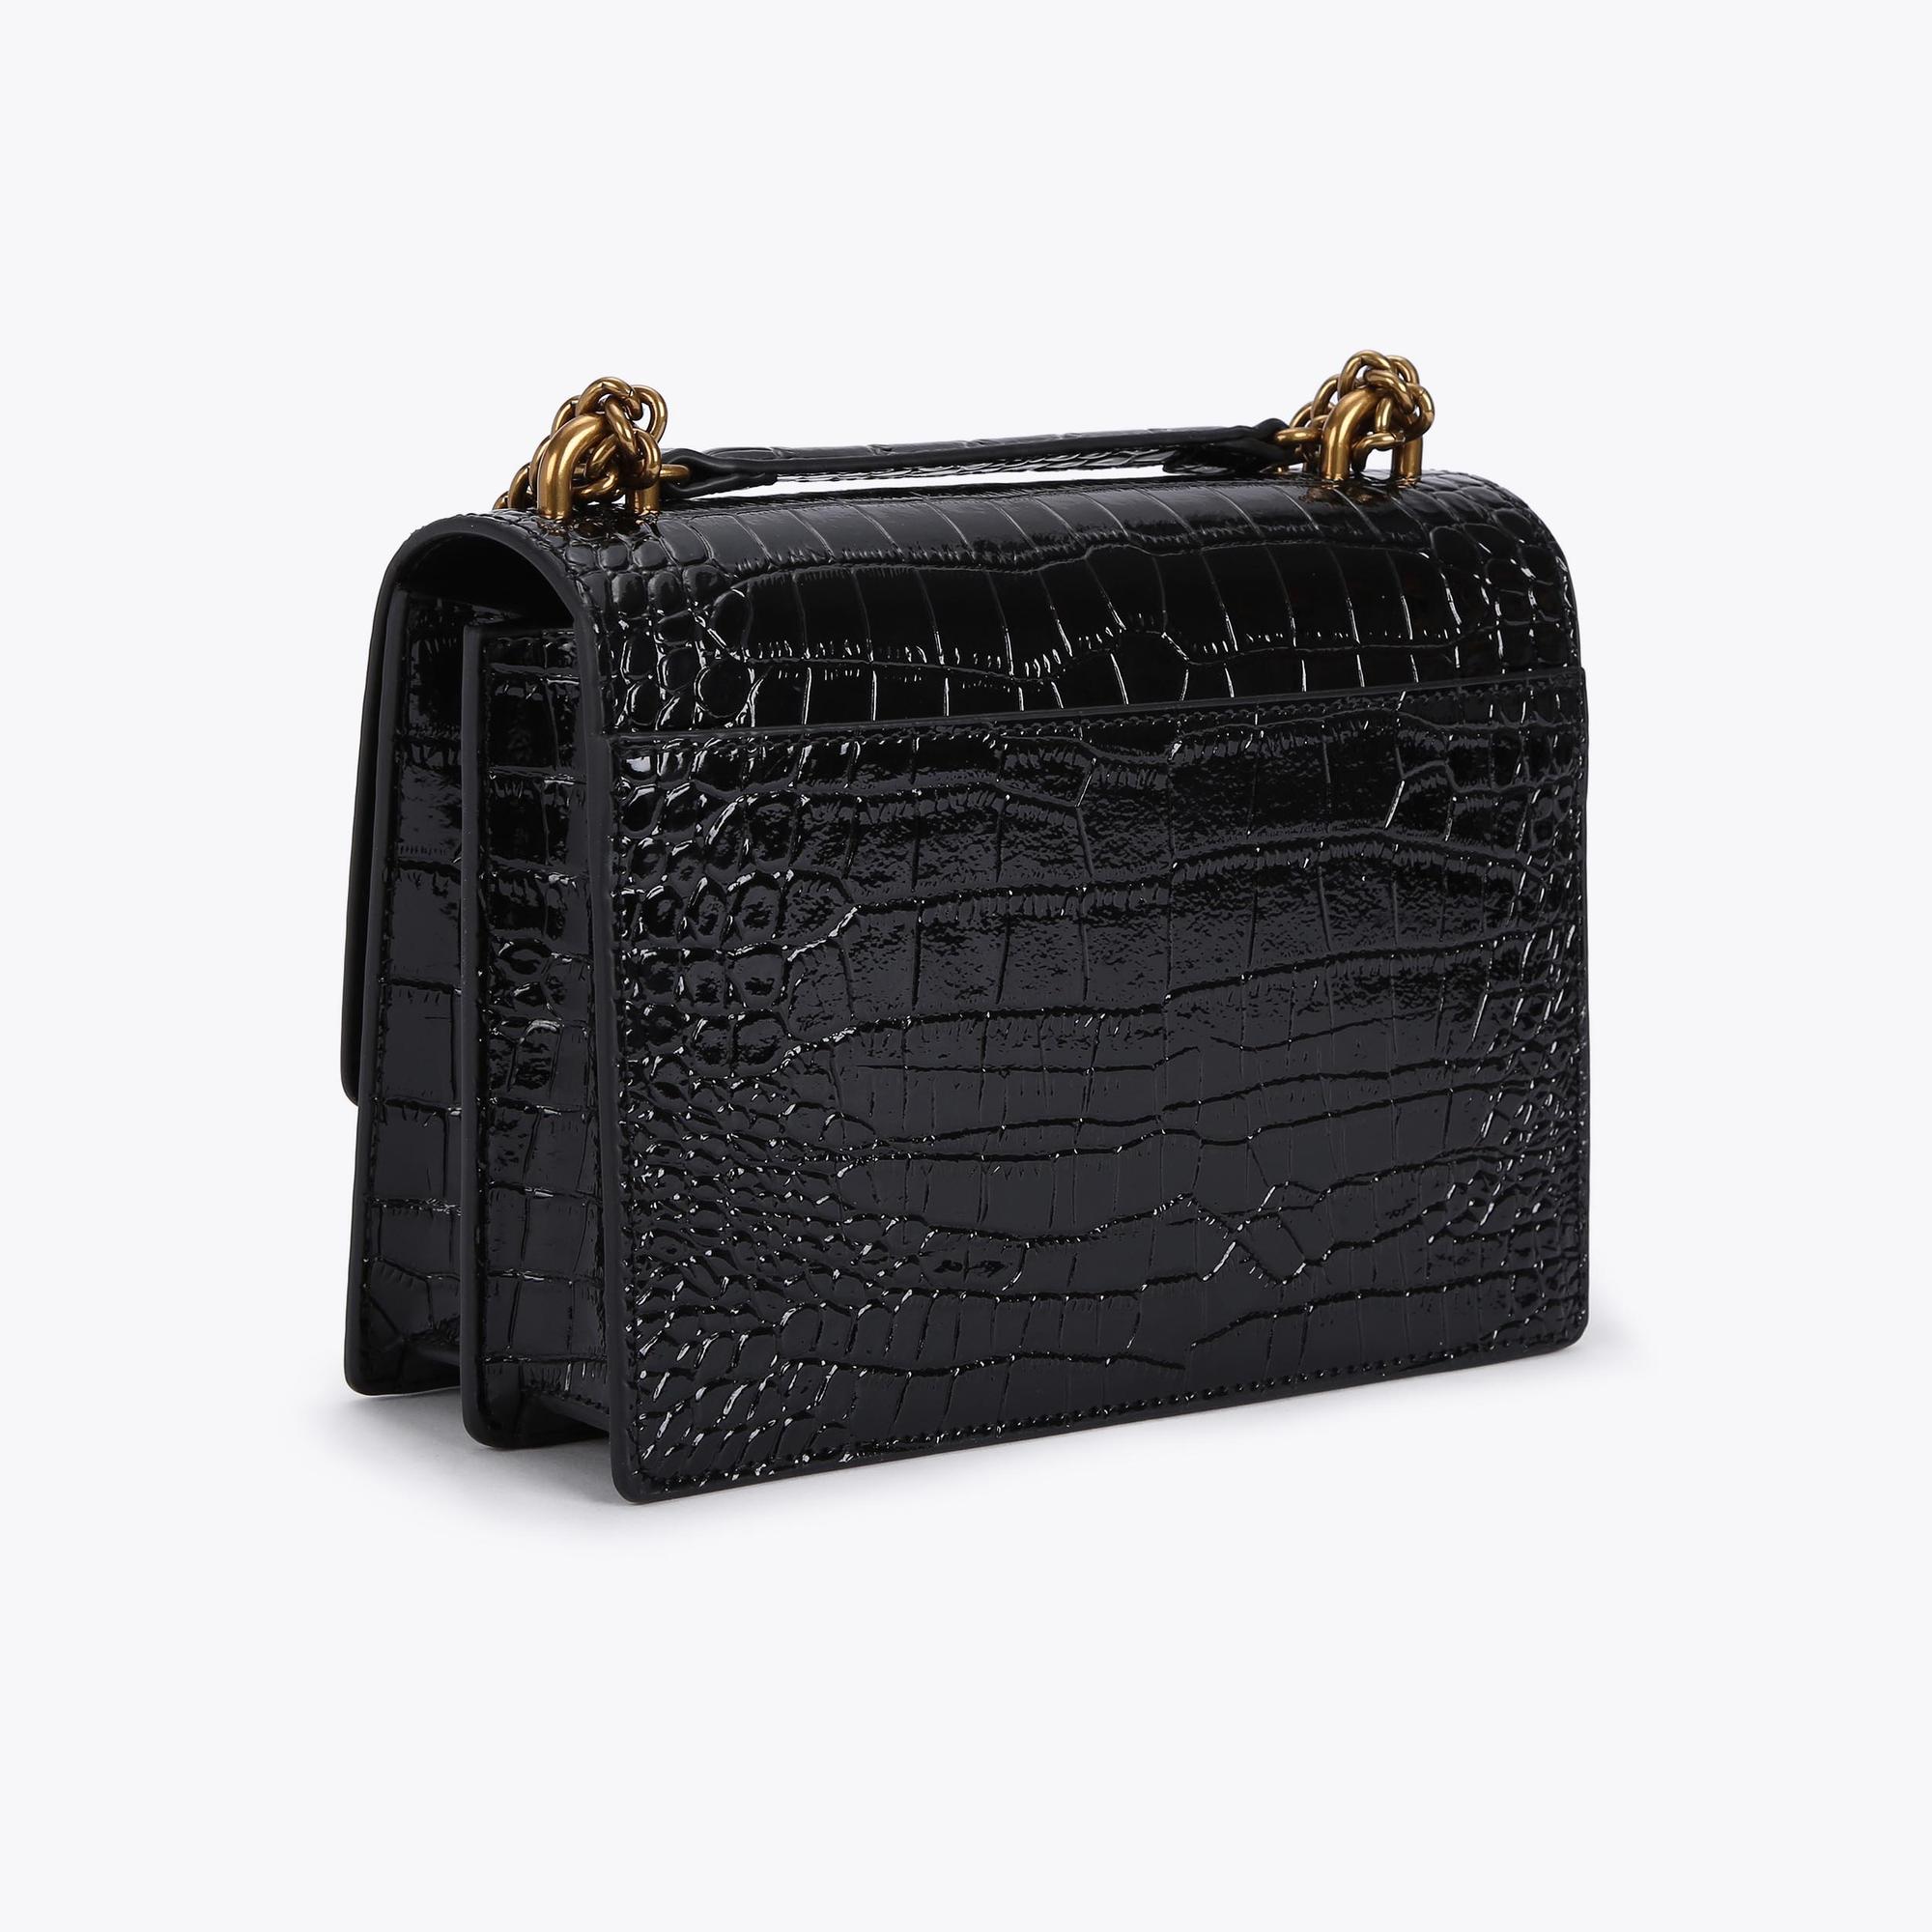 Leather crossbody bag with all-over embossed eagle